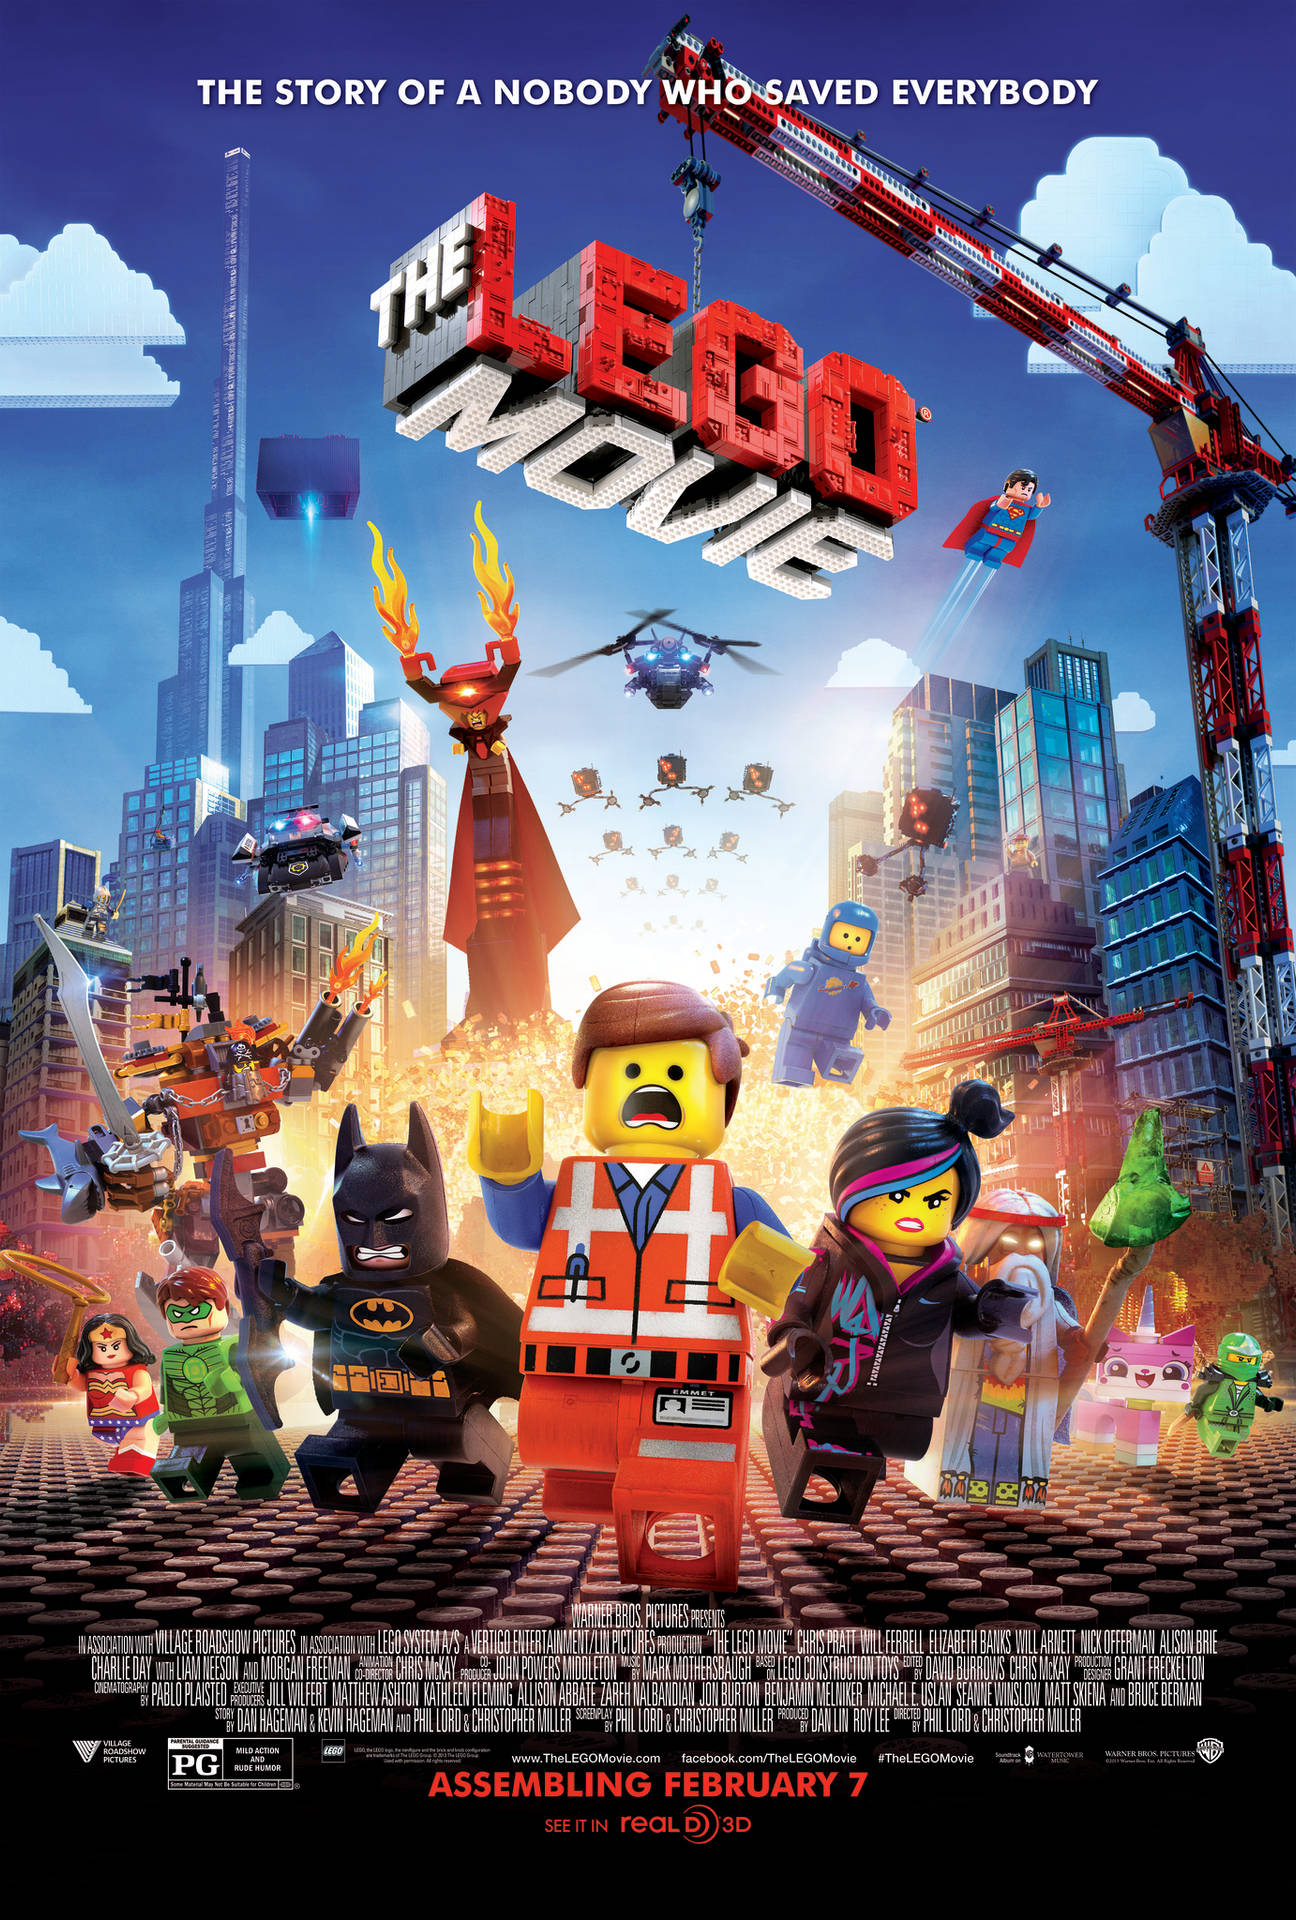 Running The Lego Movie Poster